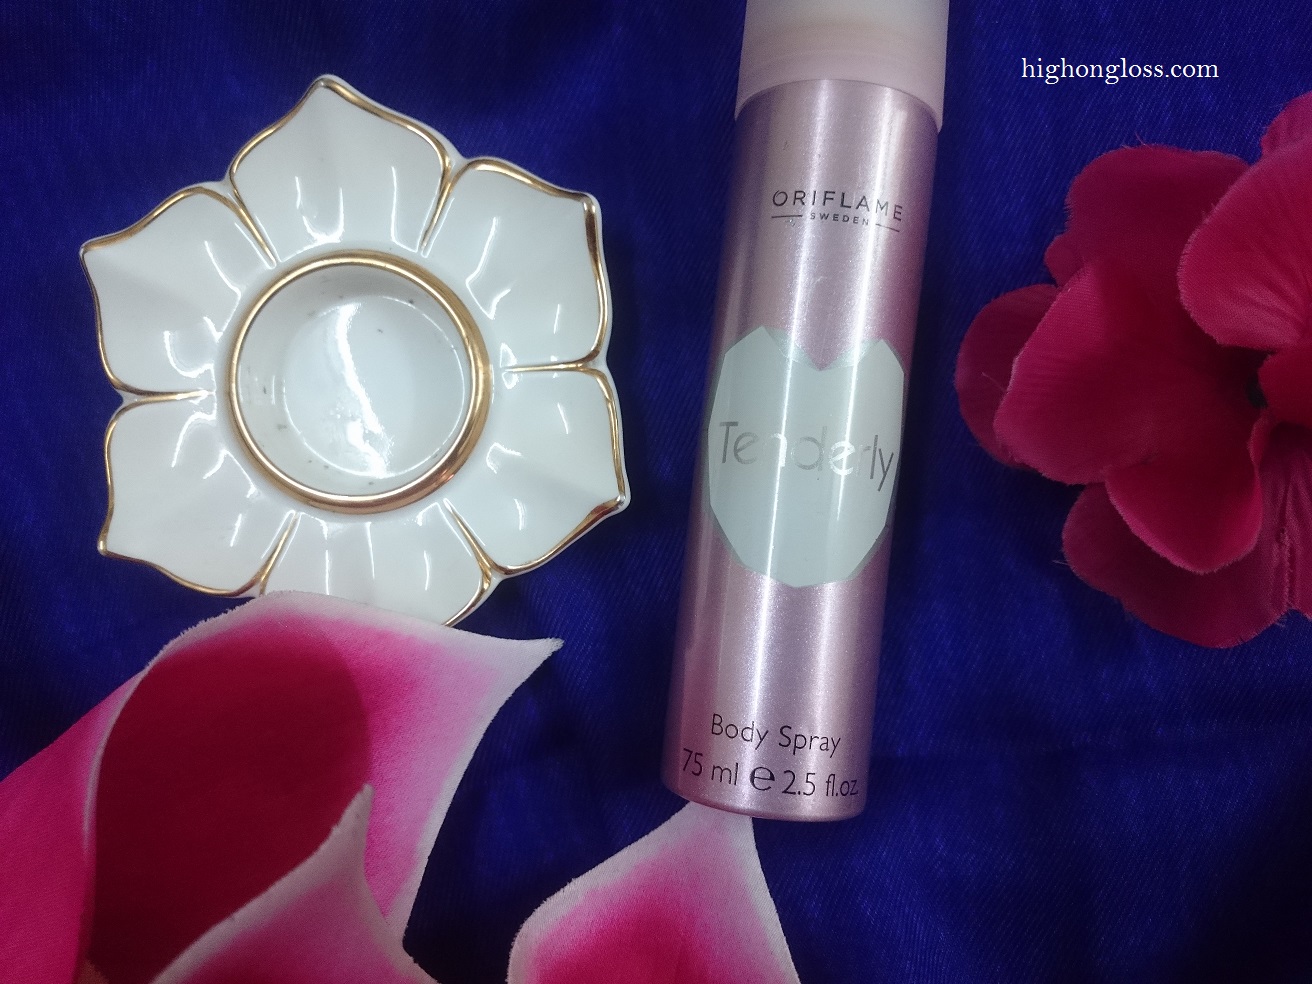 Oriflame Tenderly Body Spray : Review - High On Gloss